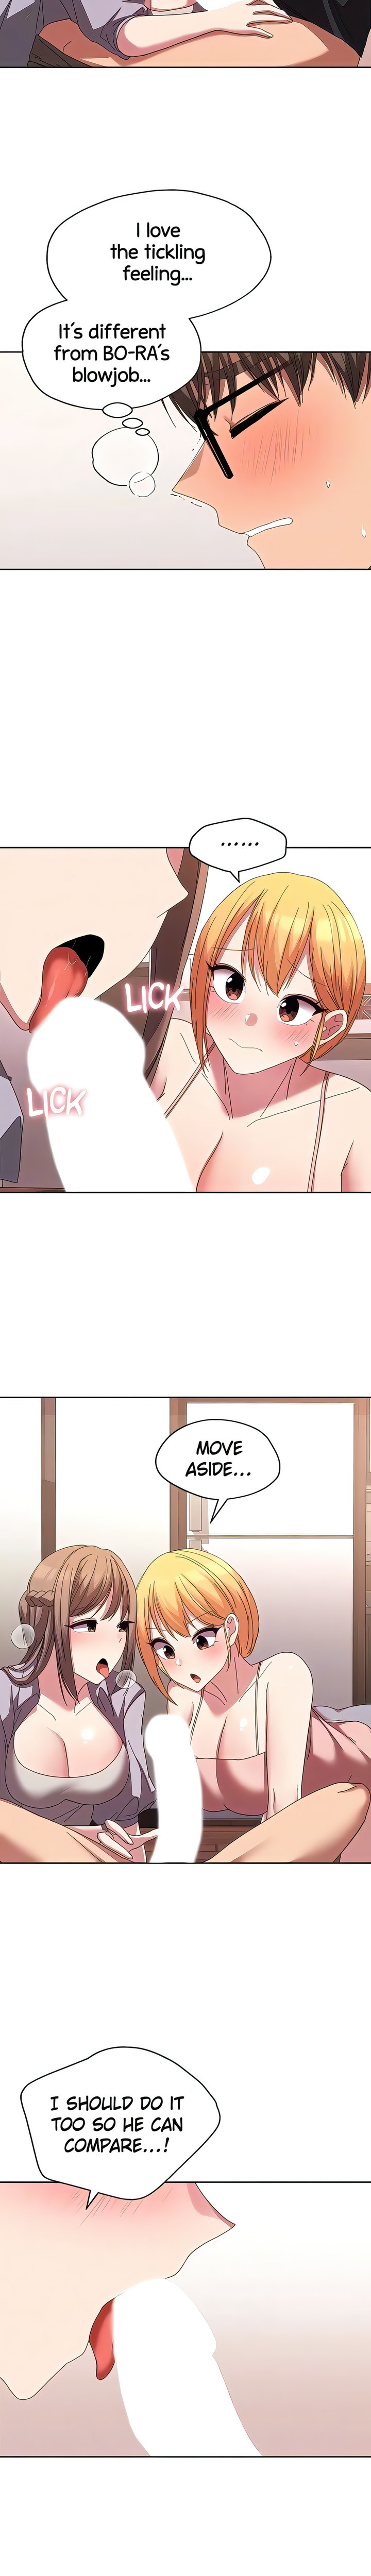 Girls I Used to Teach - Chapter 32 Page 6